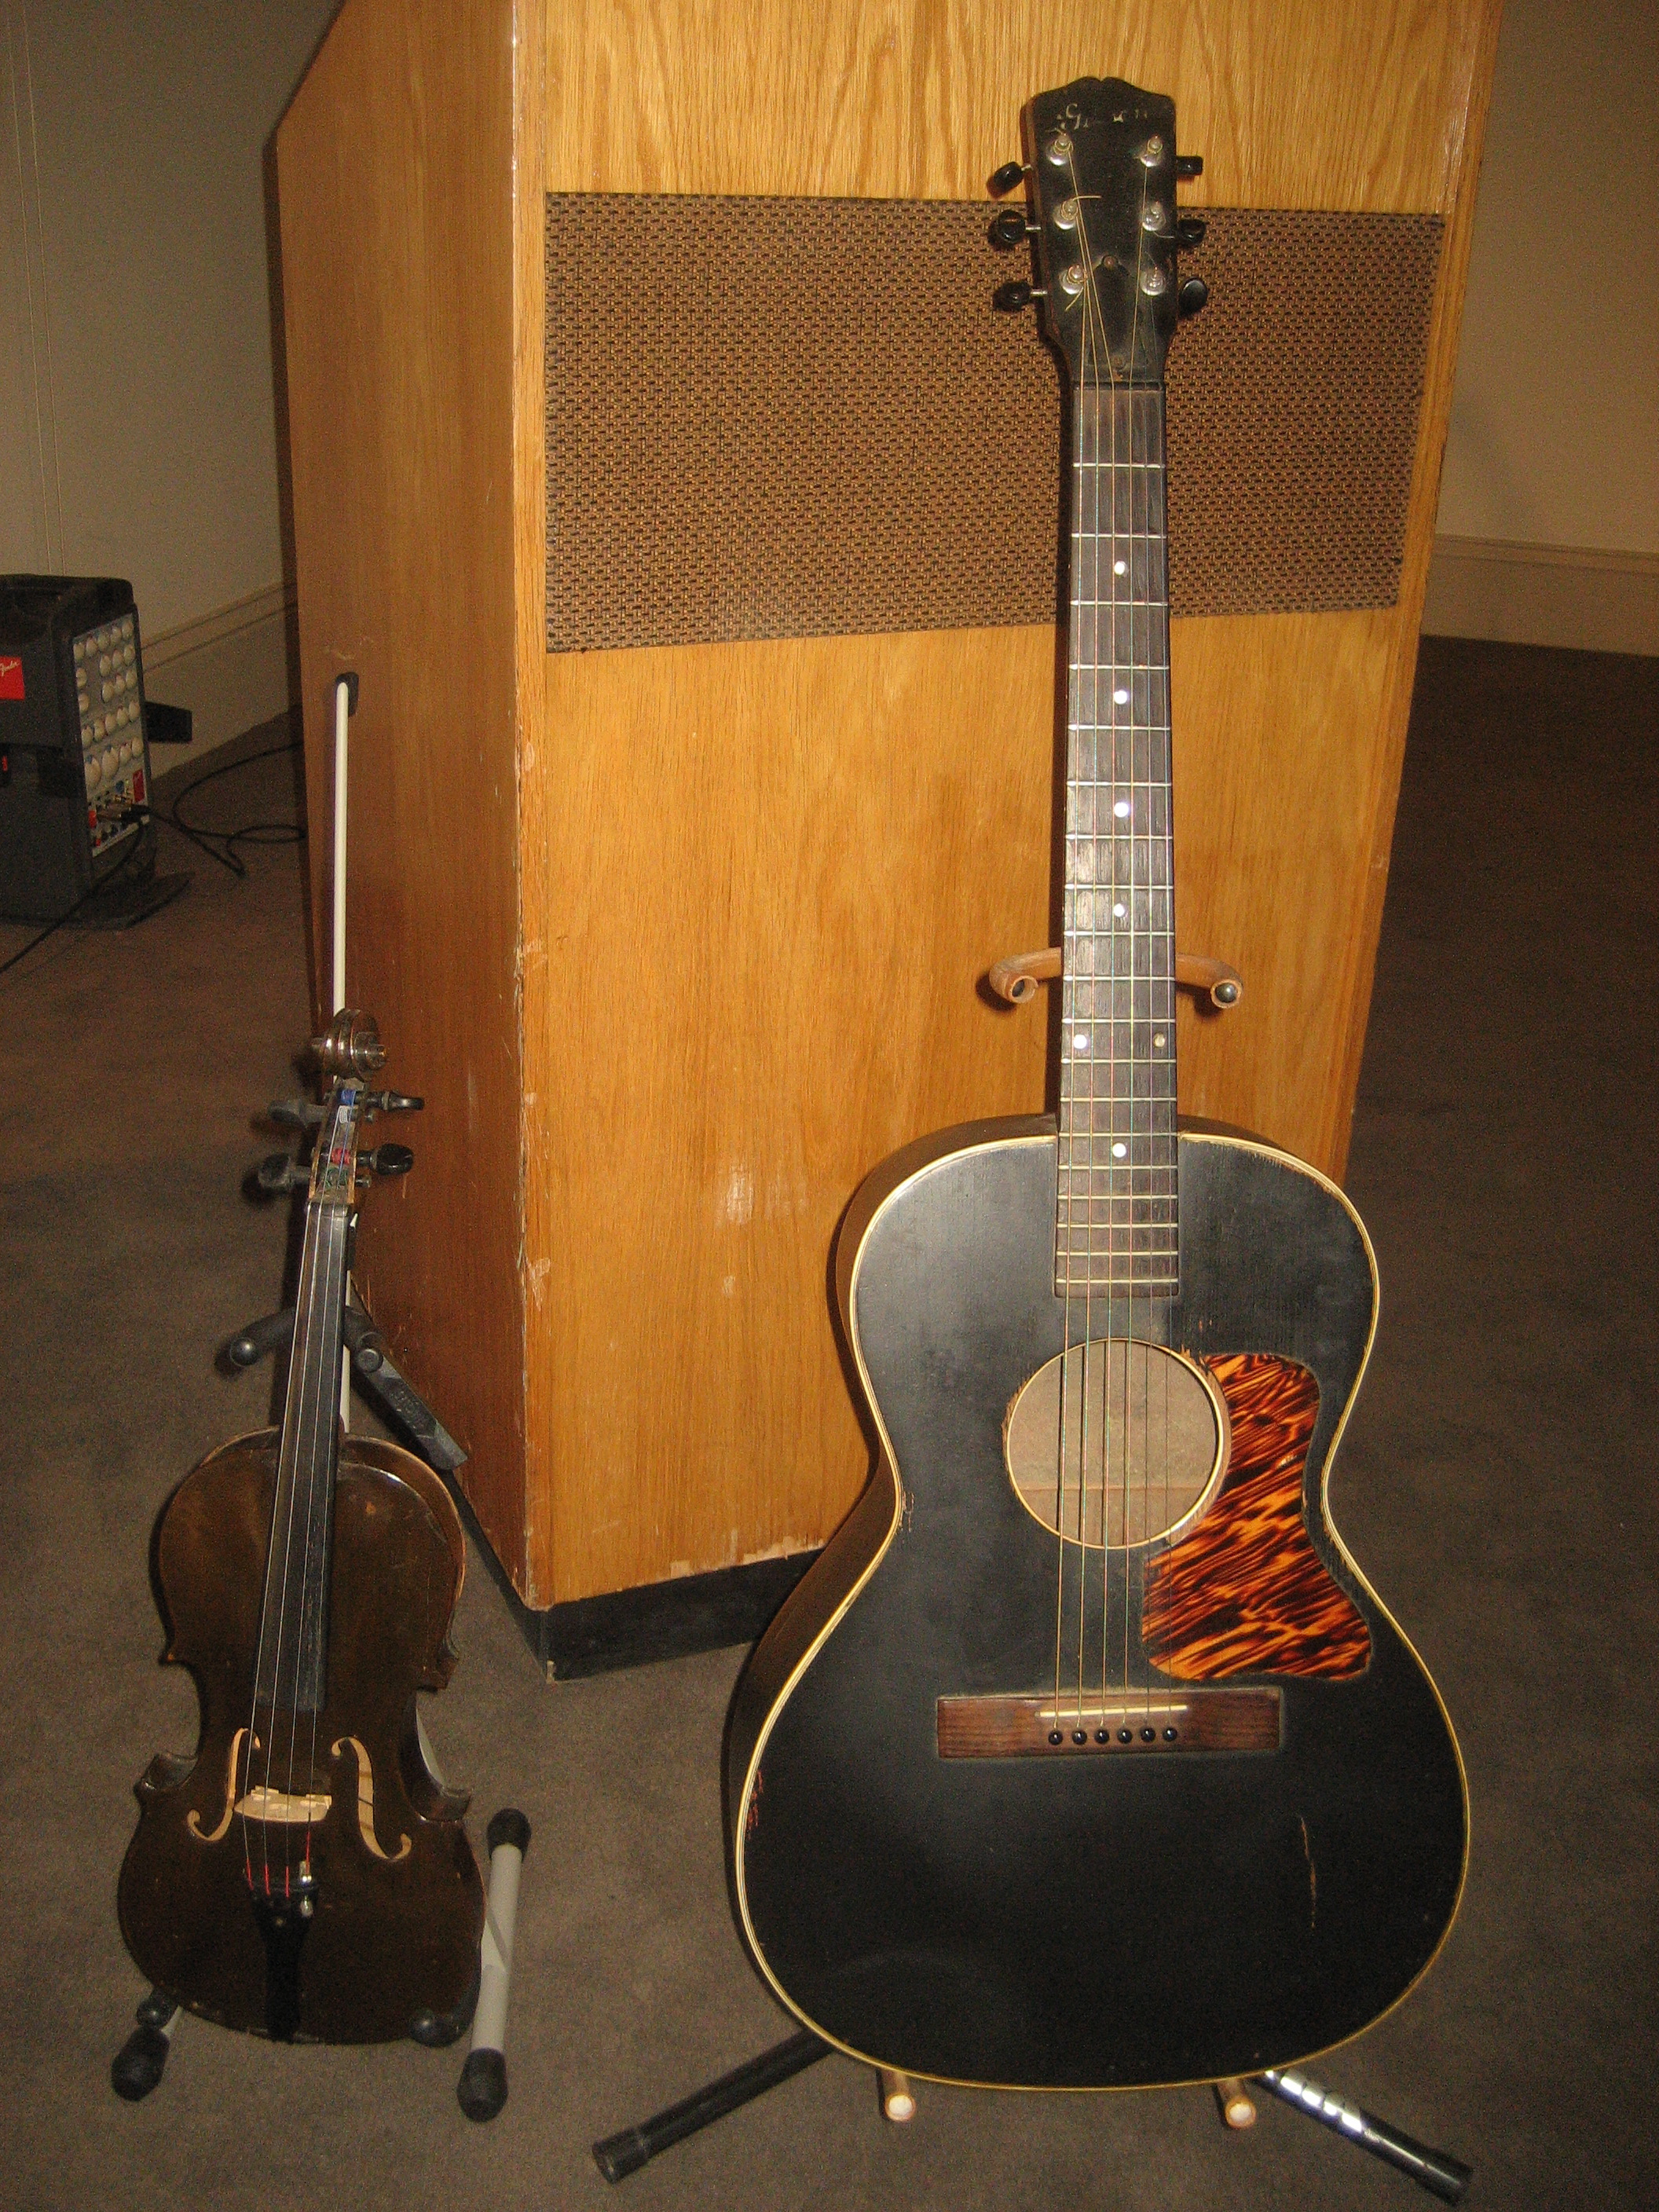 File:Snoozer Quinn Violin and Guitar.JPG - Wikimedia Commons